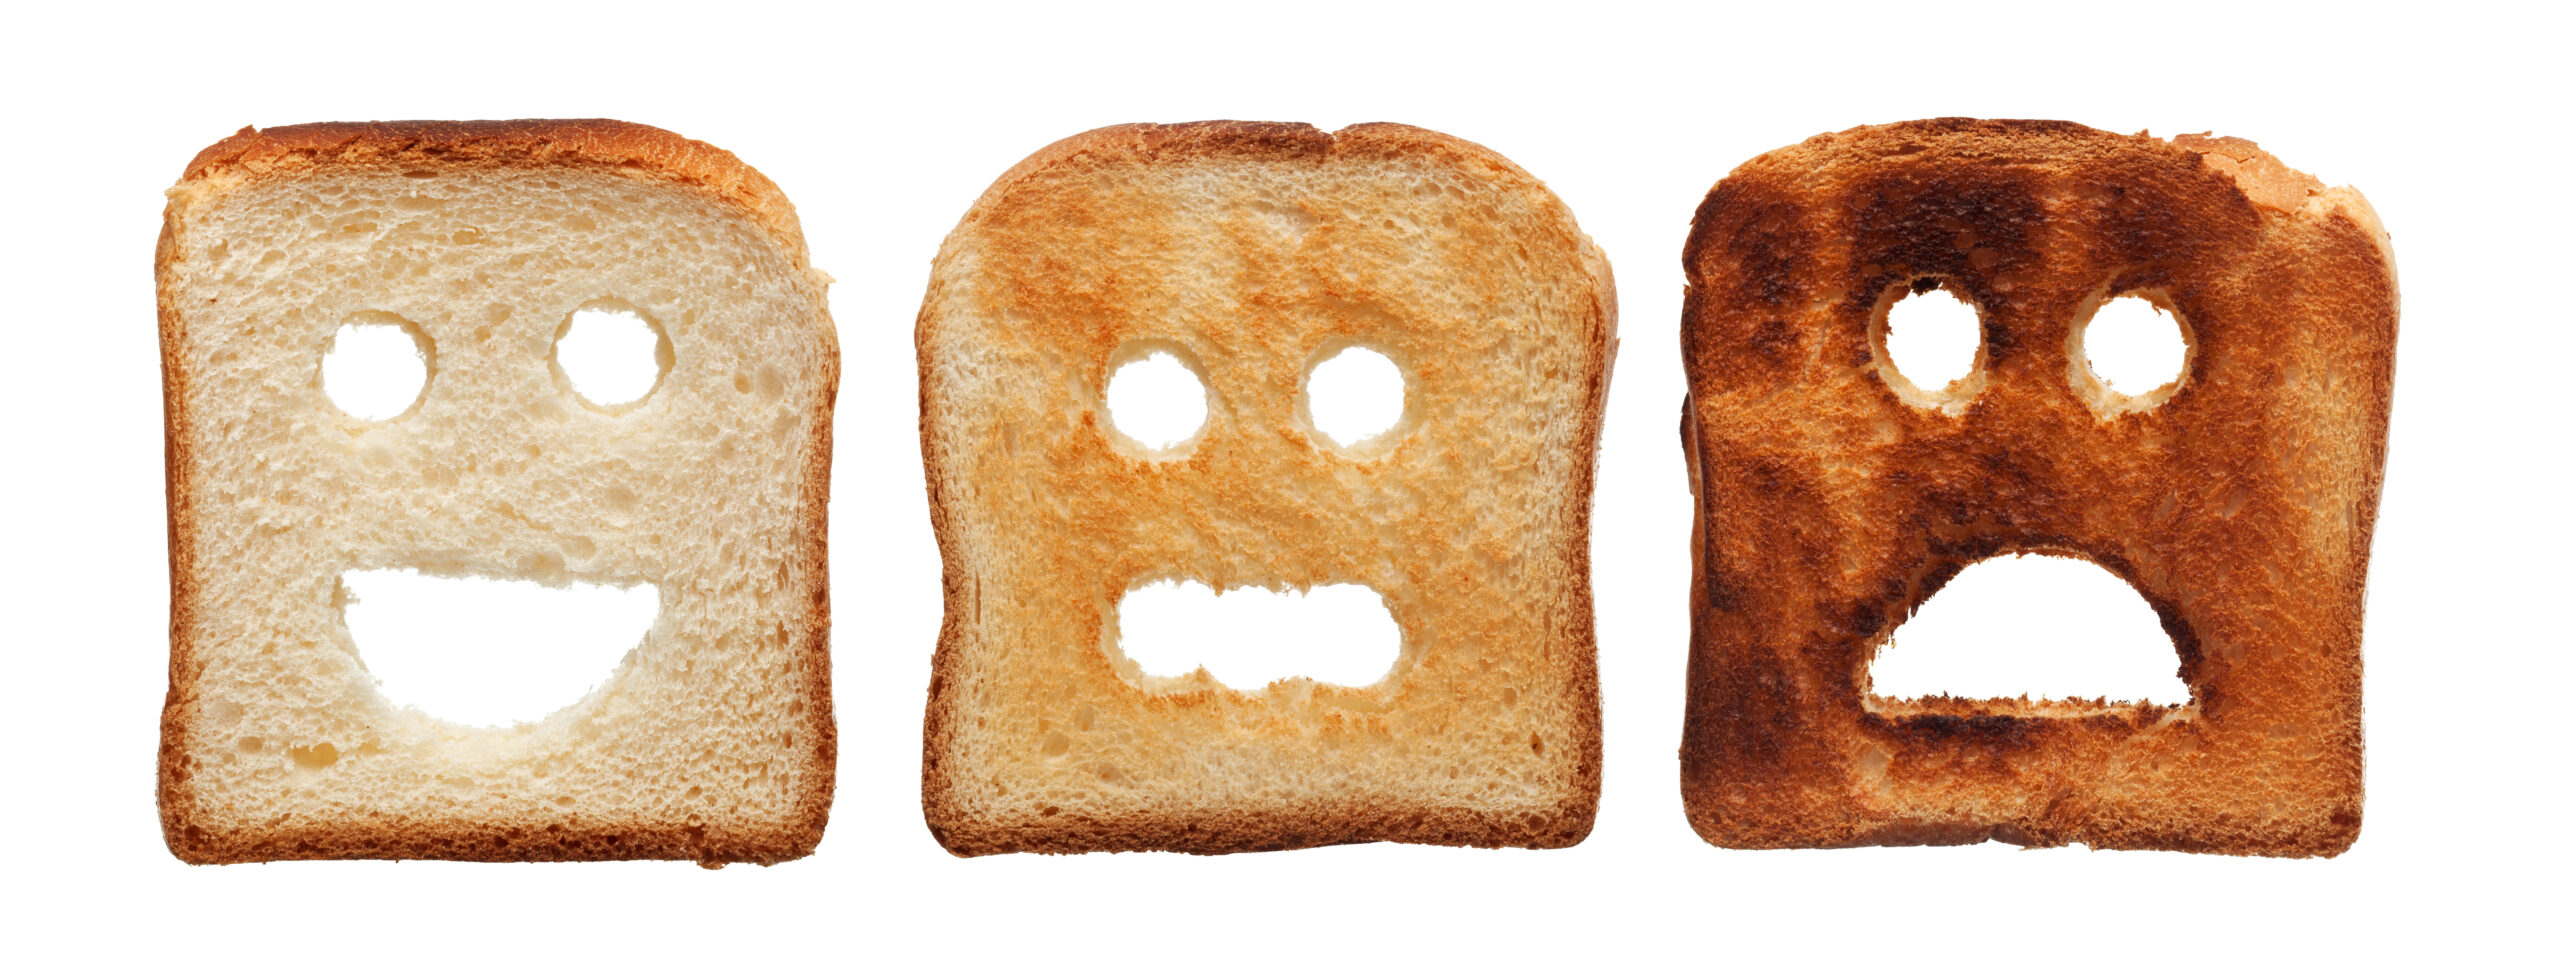 Raise a Slice to the Humble Hero It's National Toast Day! ECR Brokerage